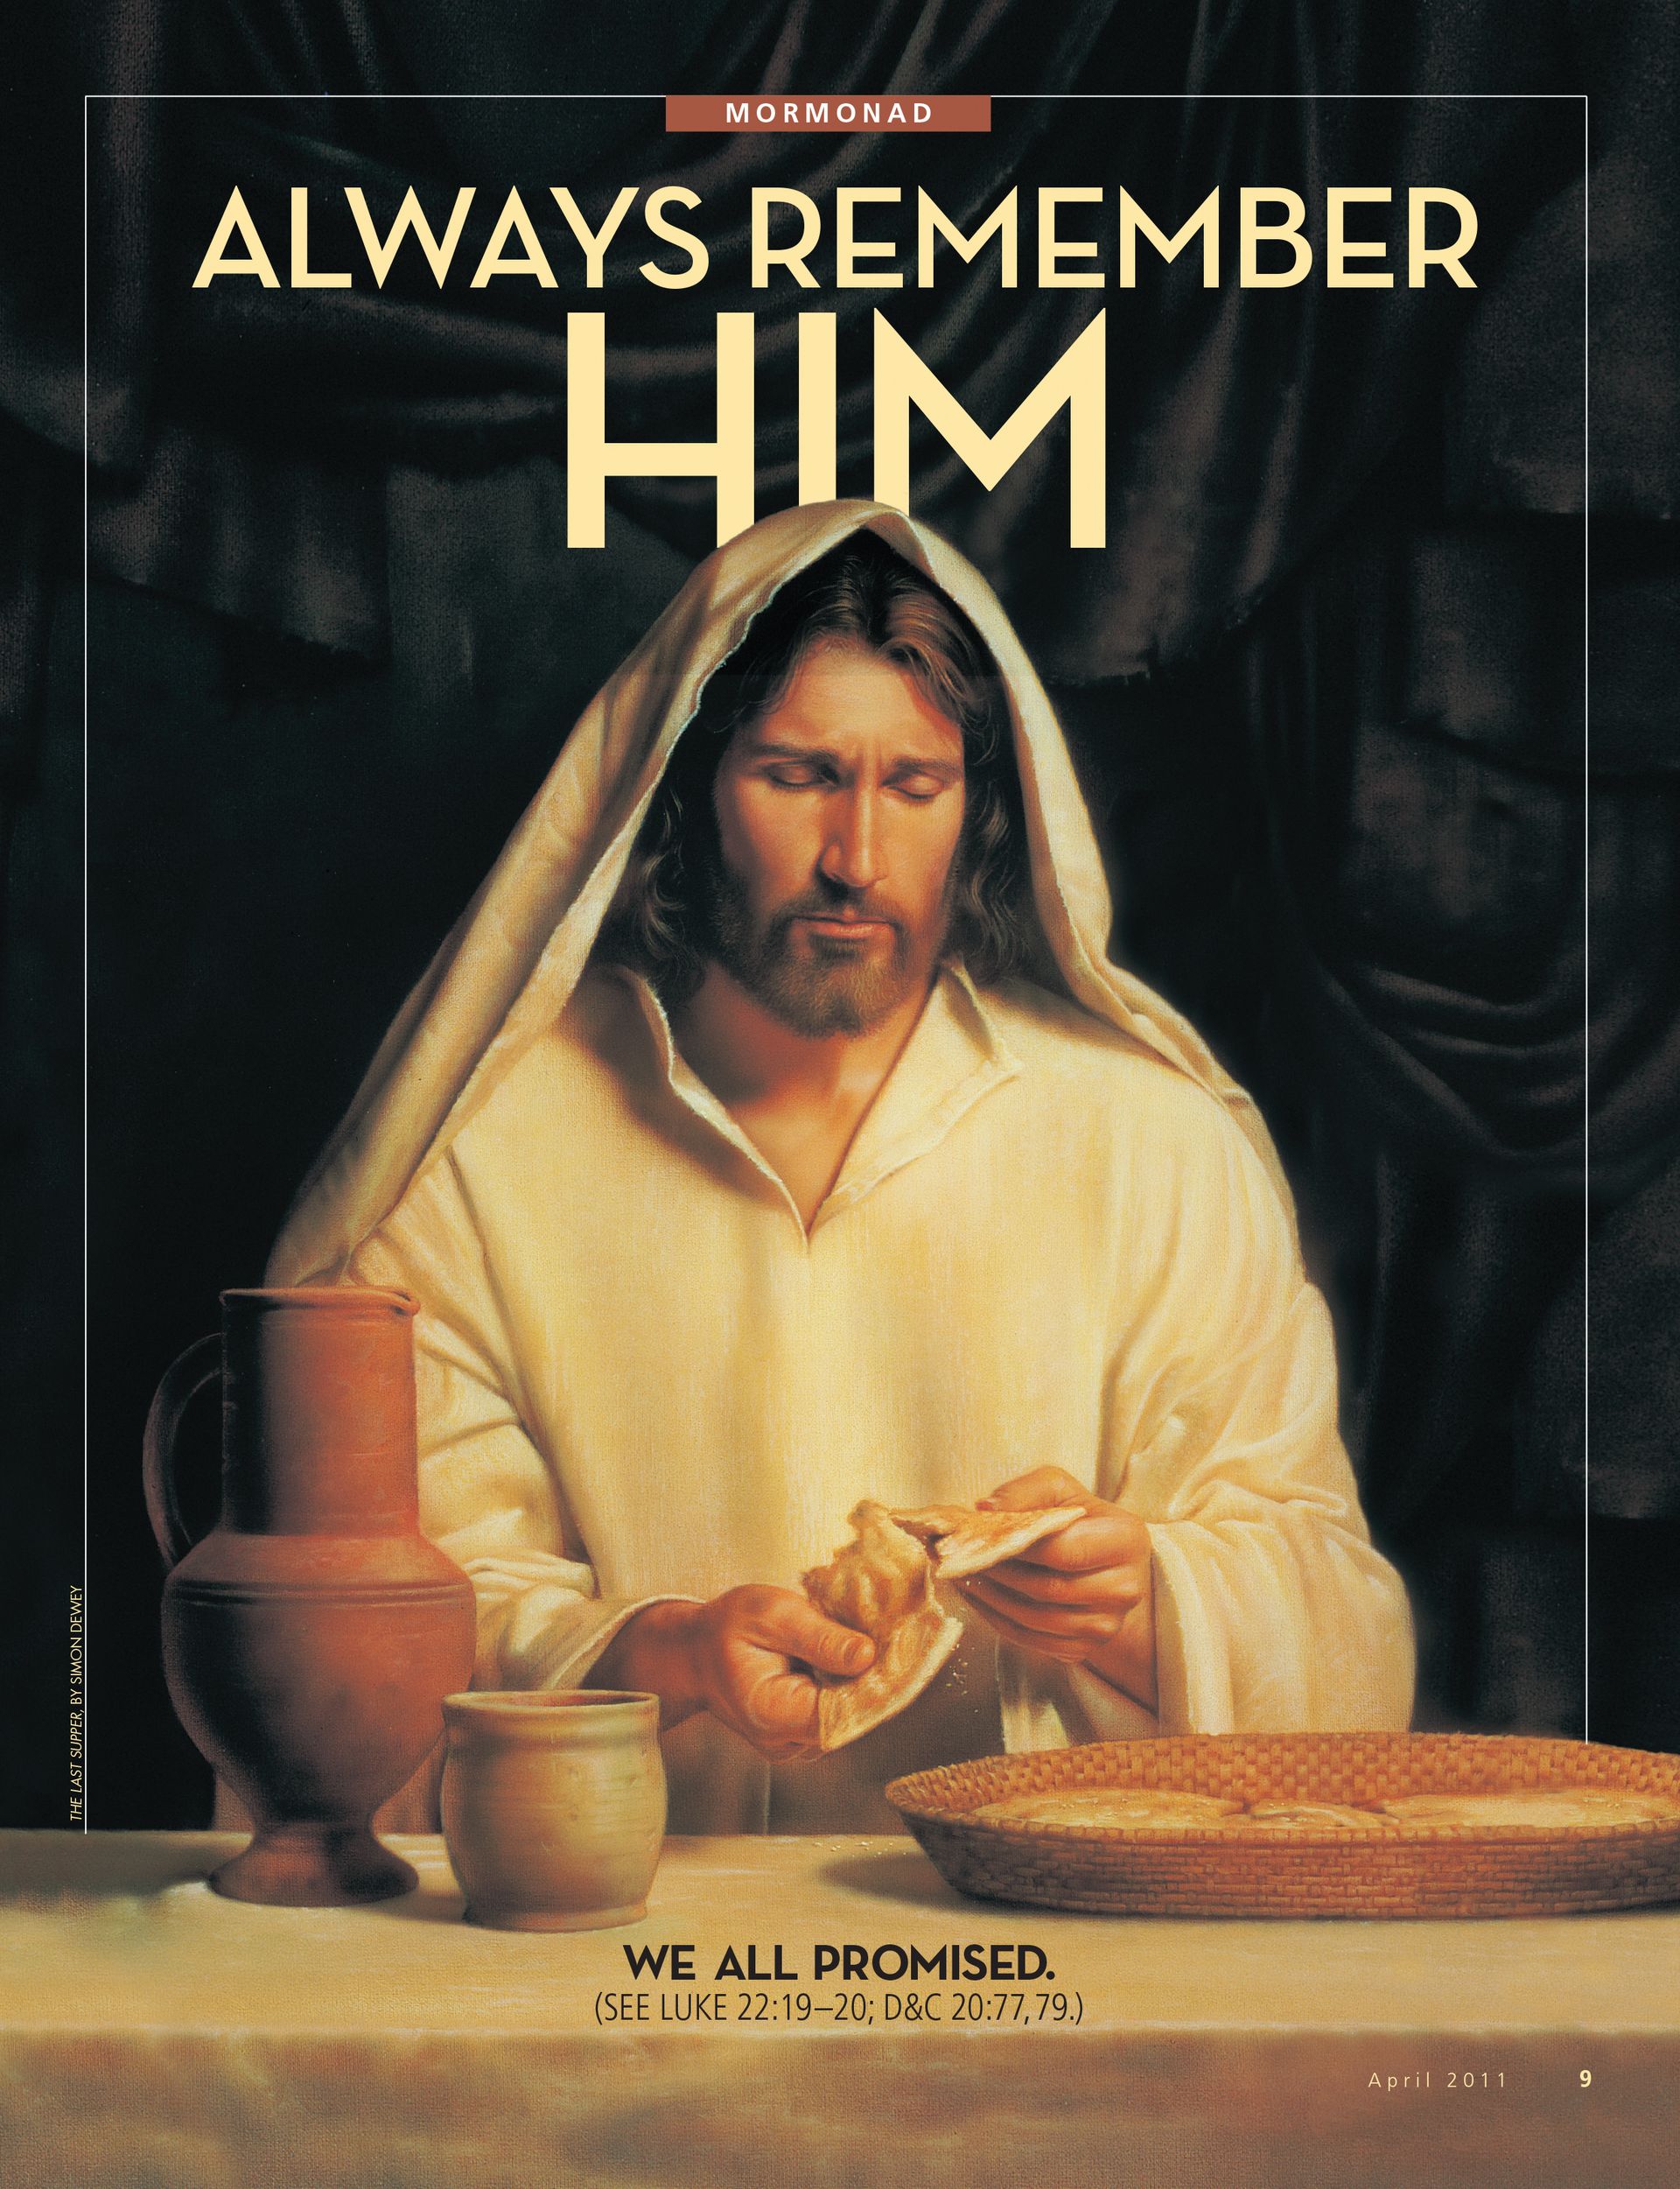 Always Remember Him. We all promised. (See Luke 22:19–20; D&C 20:77,79.) Apr. 2011 © undefined ipCode 1.